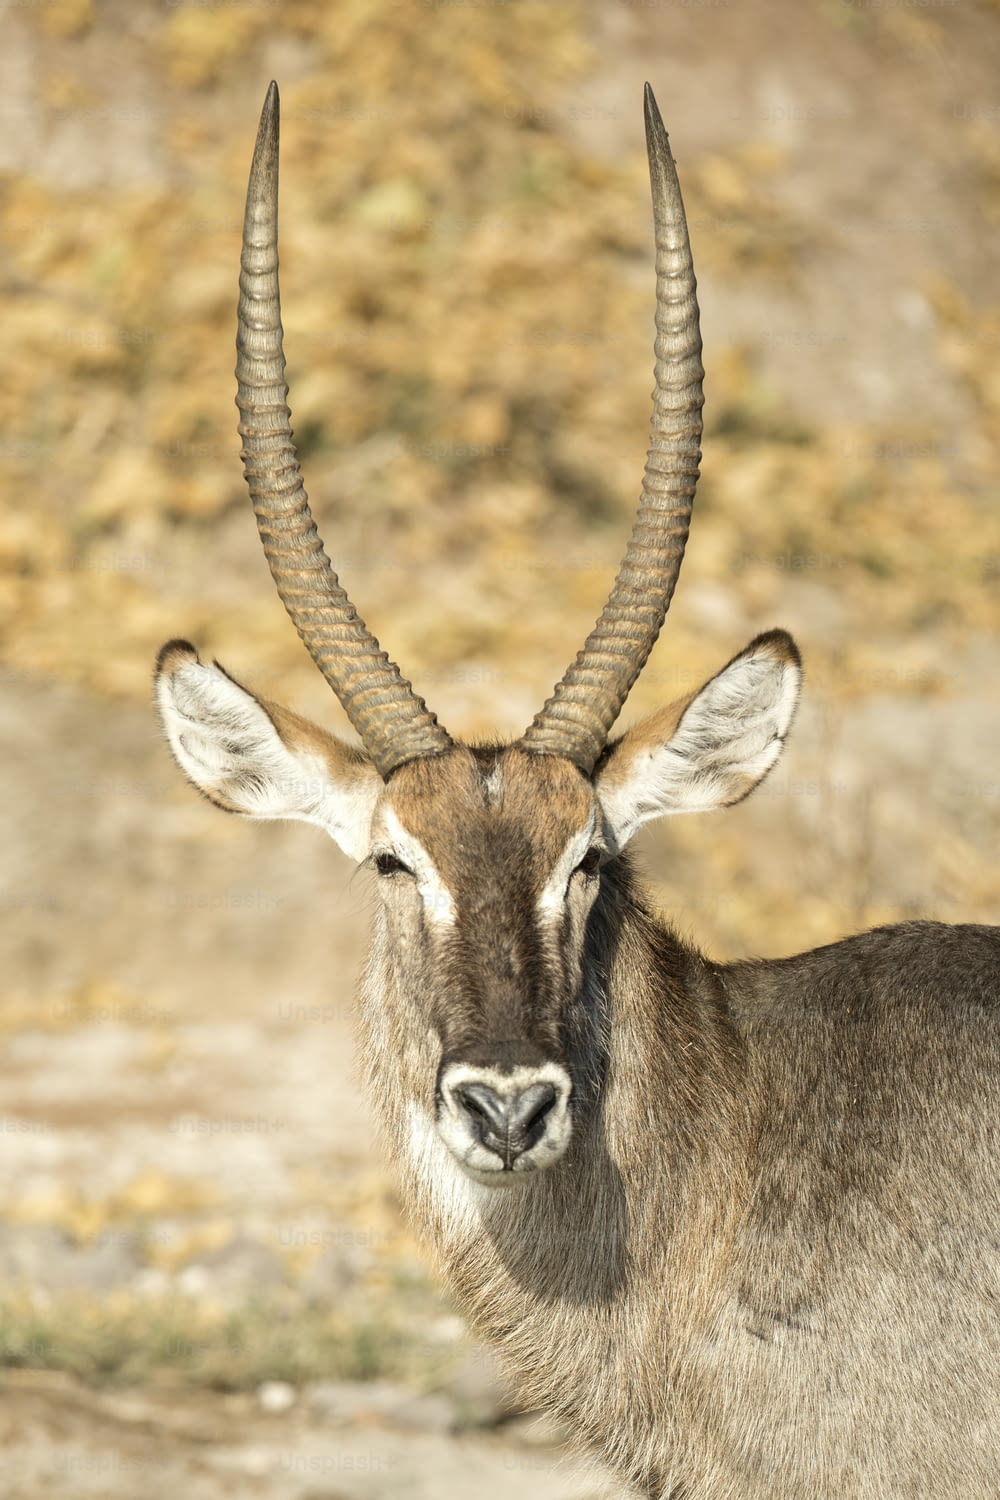 A waterbuck on the bank of the Chobe River, Botswana.